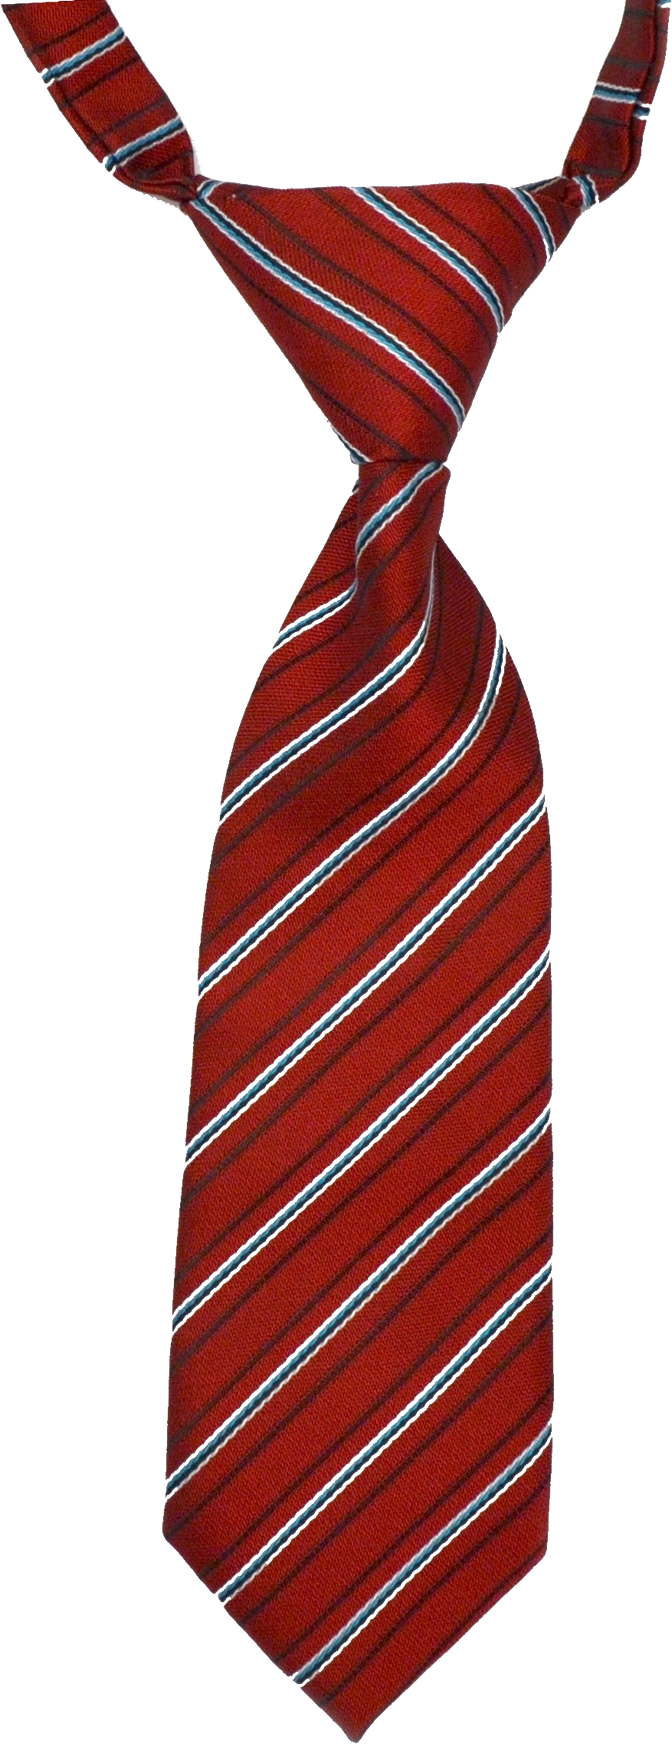 Red Tie transparent background PNG cliparts free download